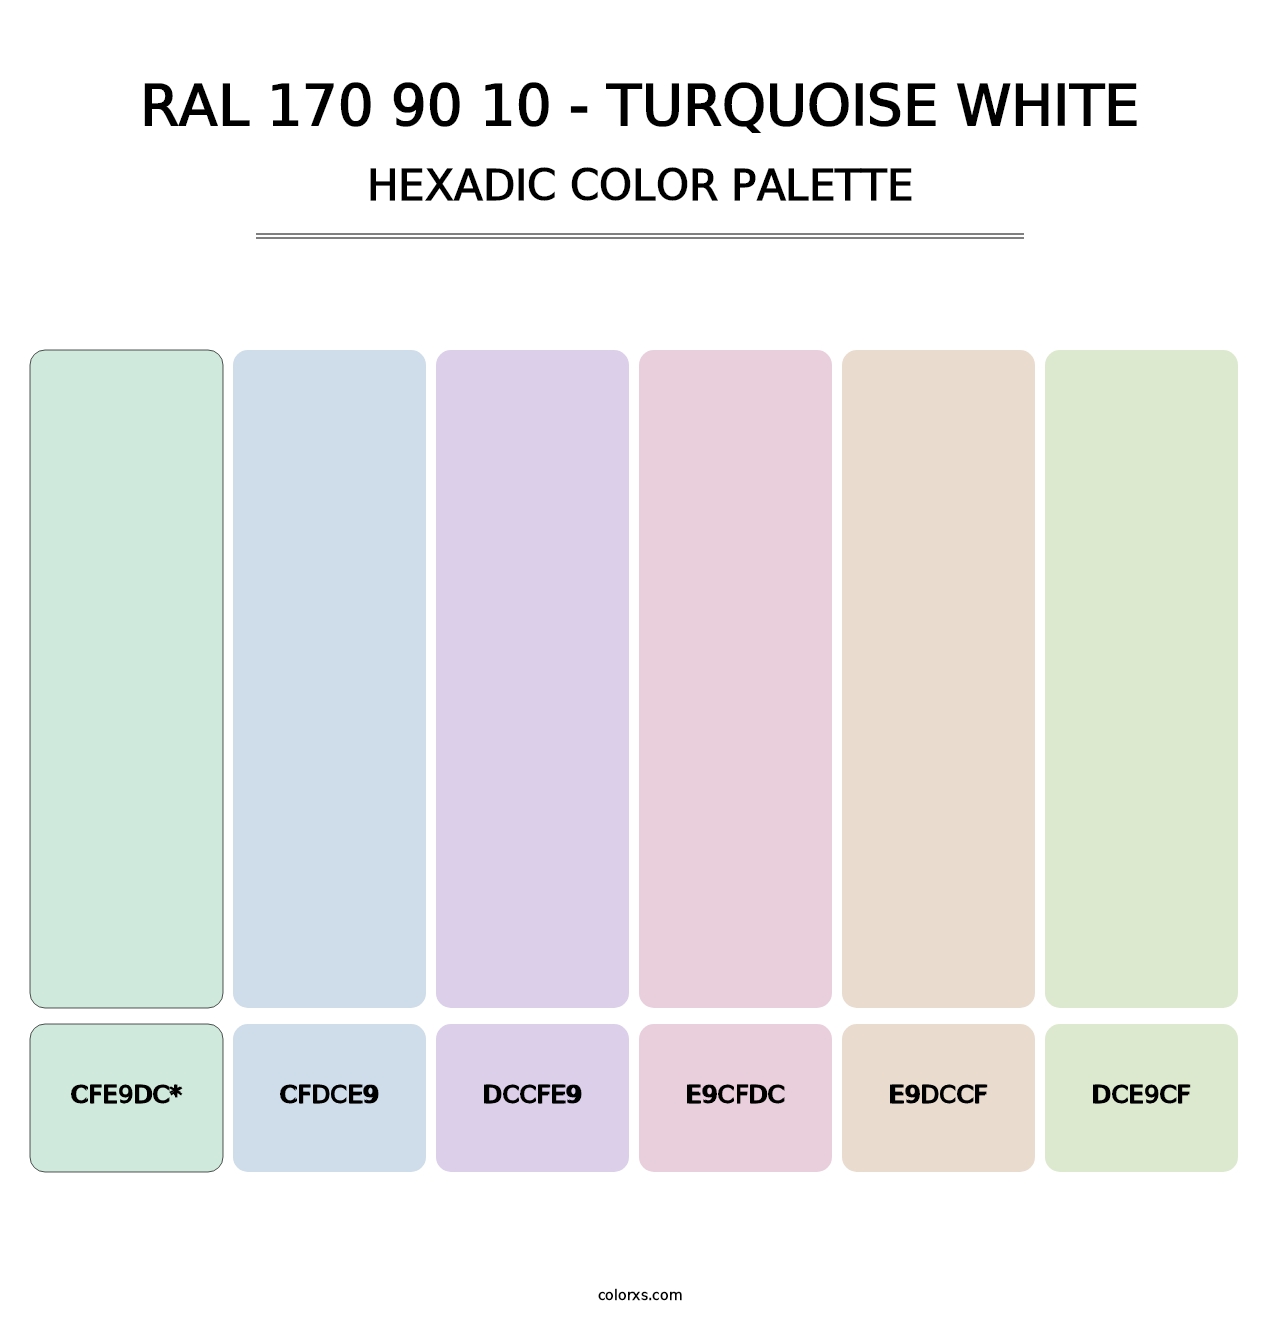 RAL 170 90 10 - Turquoise White - Hexadic Color Palette